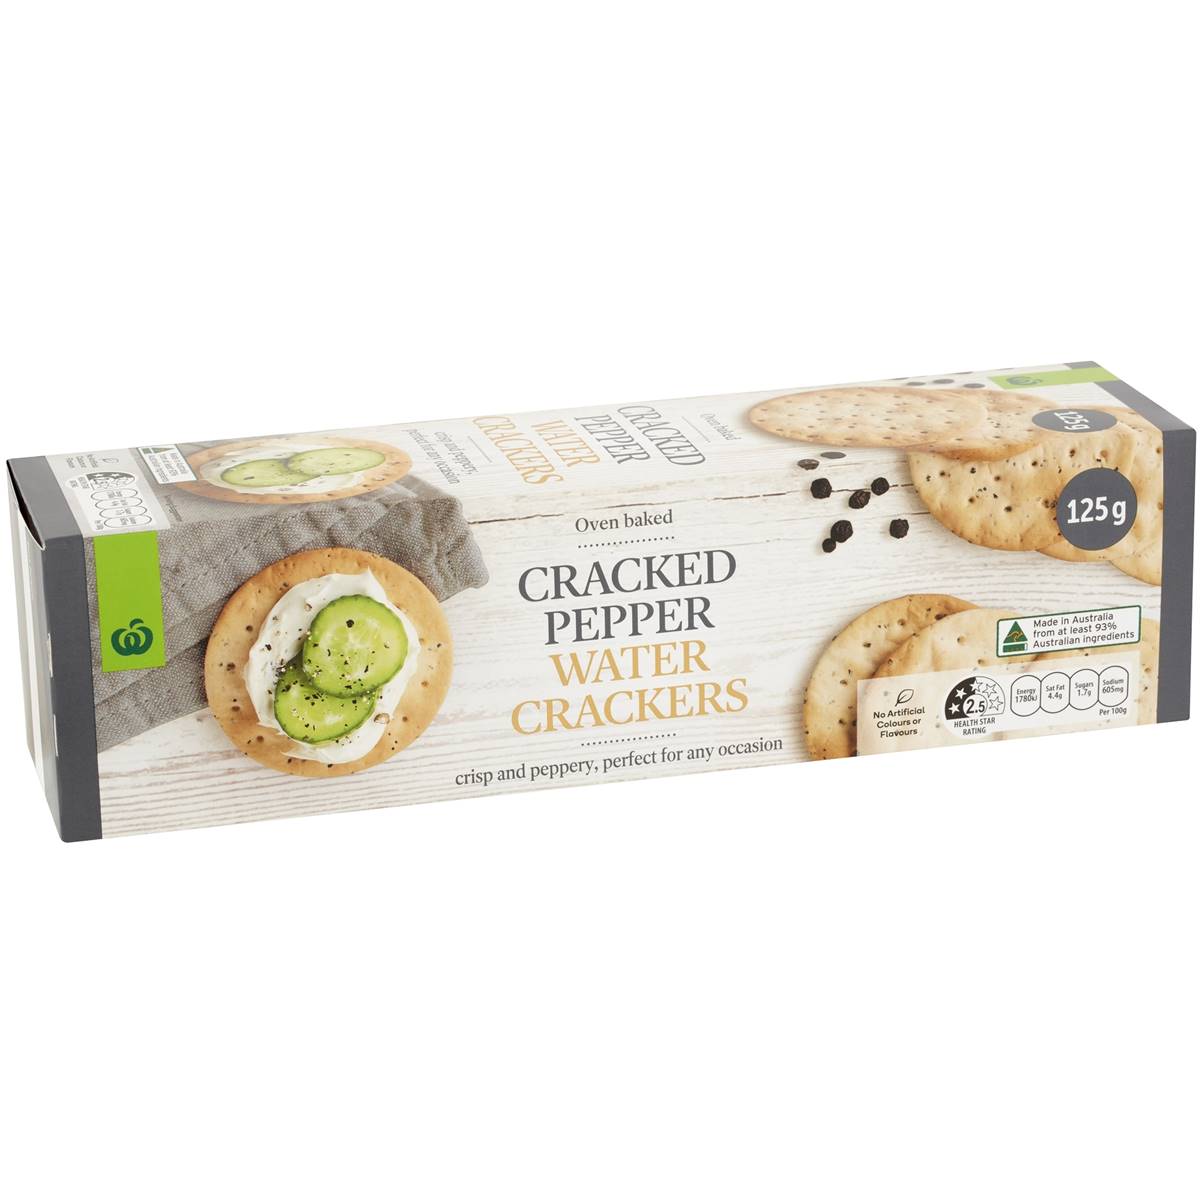 Calories in Woolworths Cracked Pepper Water Crackers